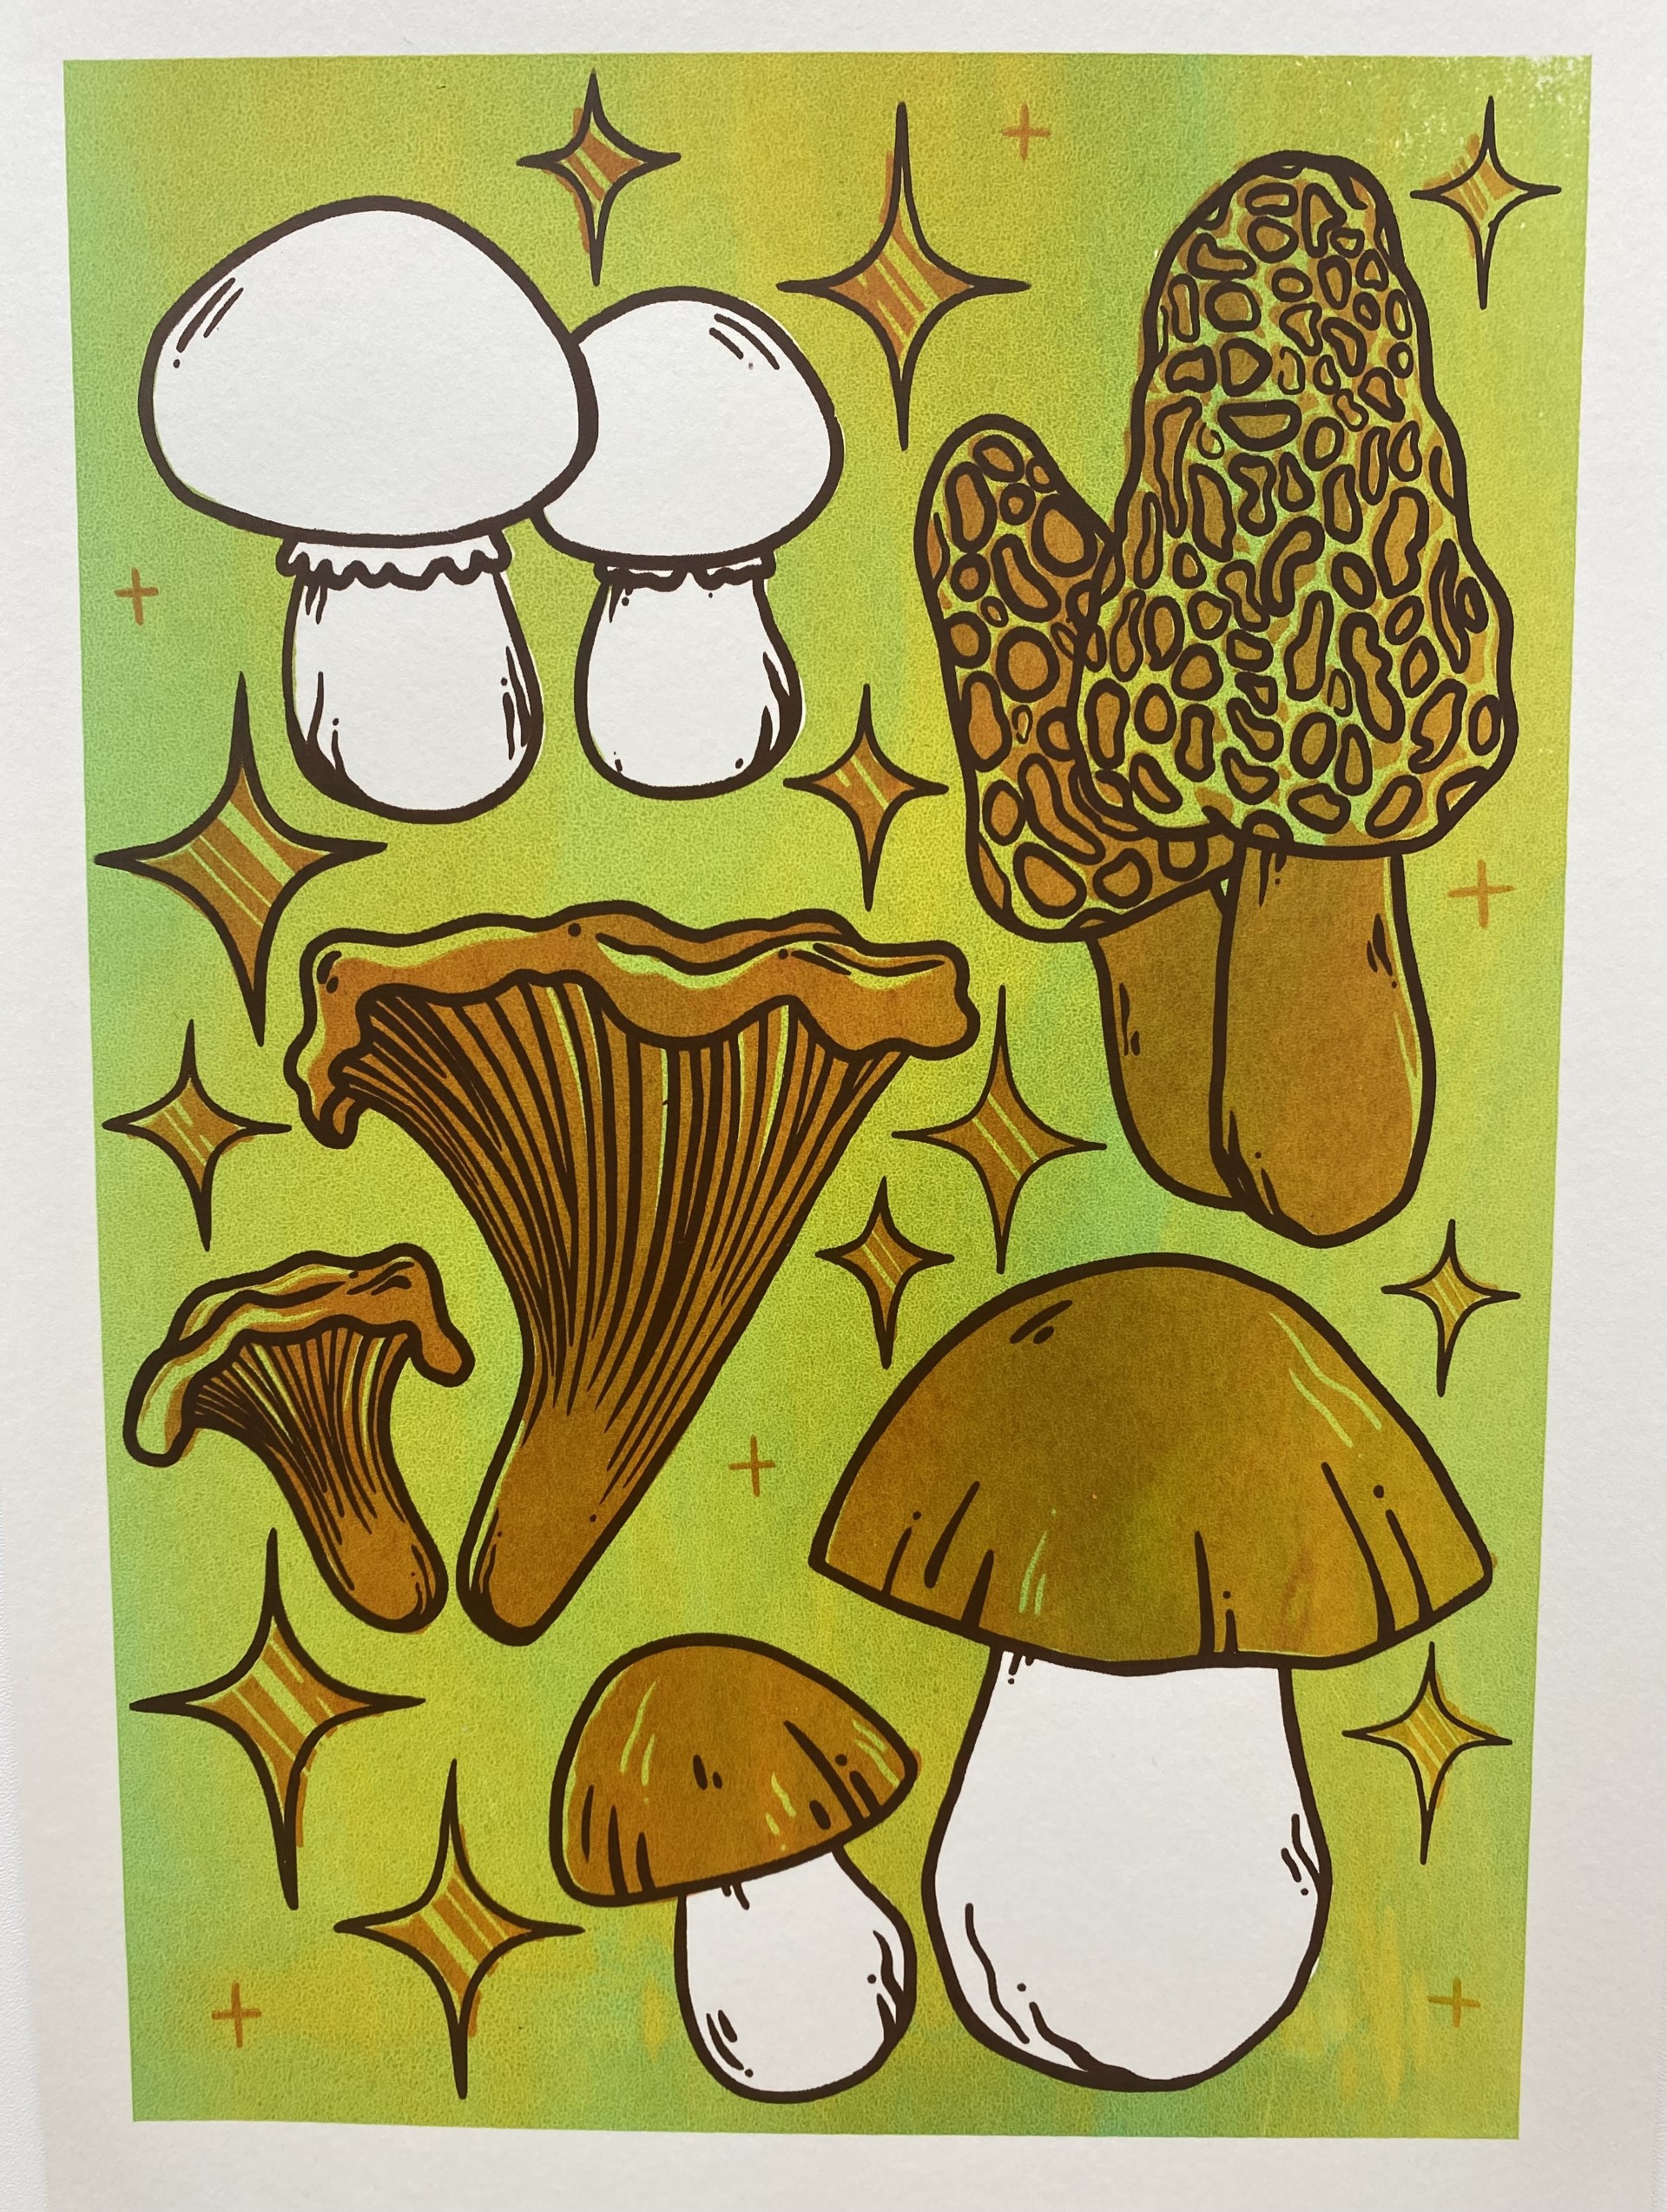 A4 screen print with 3 colour layers. The print is an illustration of different varieties of mushrooms, with sparkles / scattered stars around them.